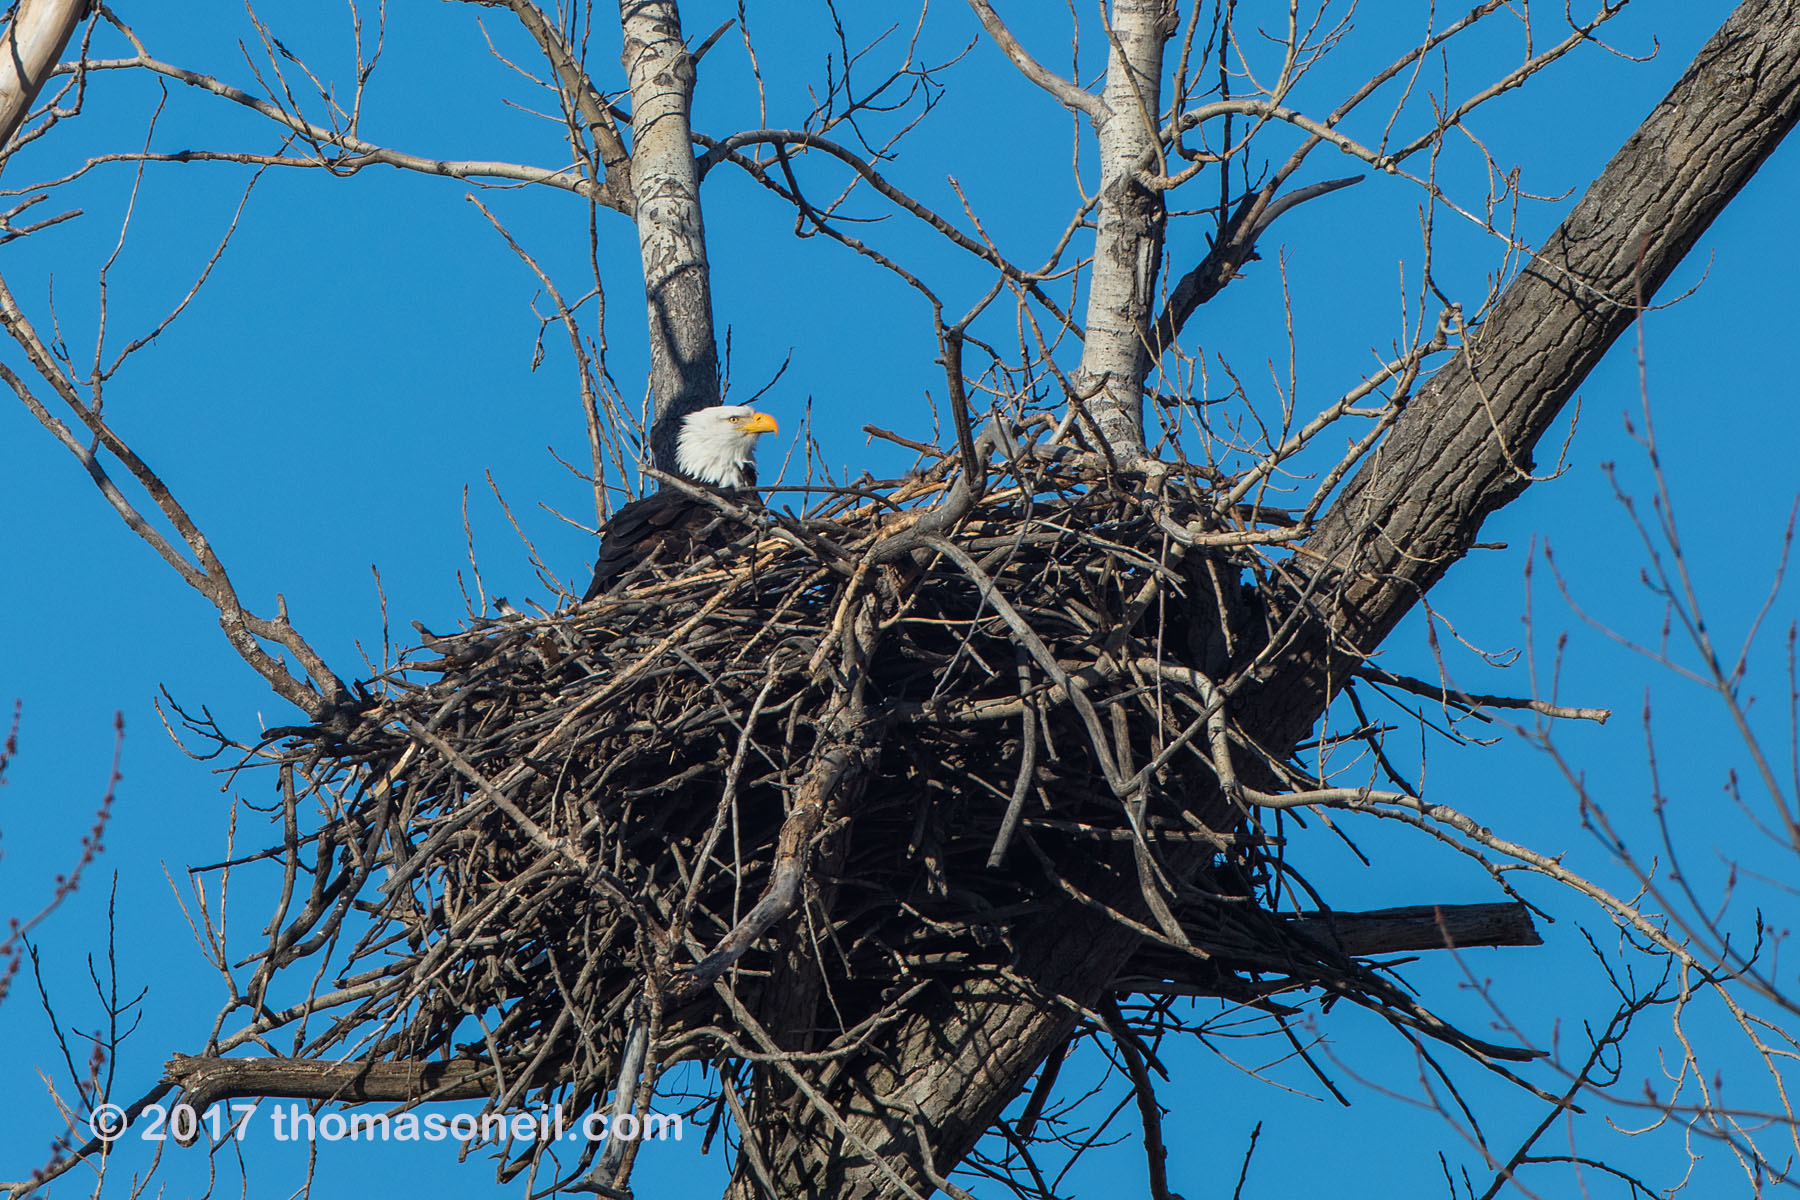 Bald eagle in nest, Loess Bluffs National Wildlife Refuge, Missouri.  Click for next photo.